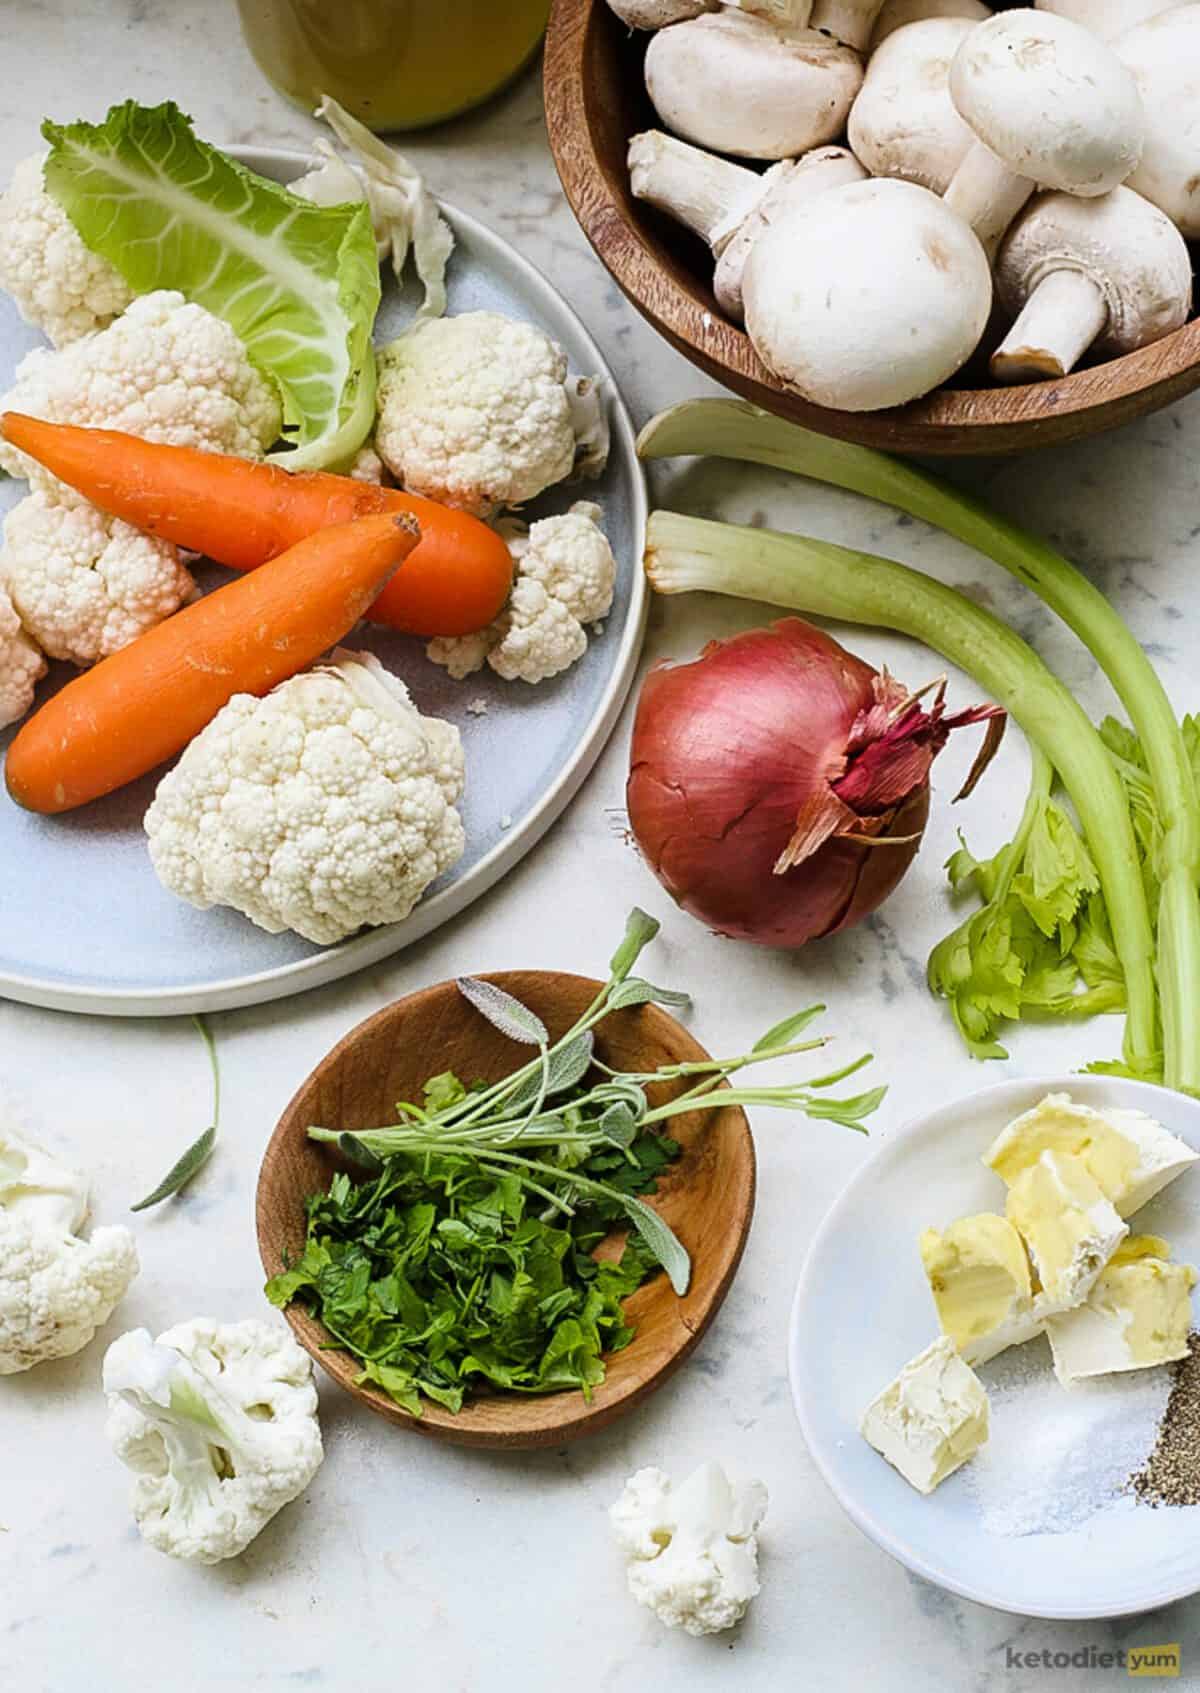 Ingredients laid out on a table for low carb cauliflower stuffing